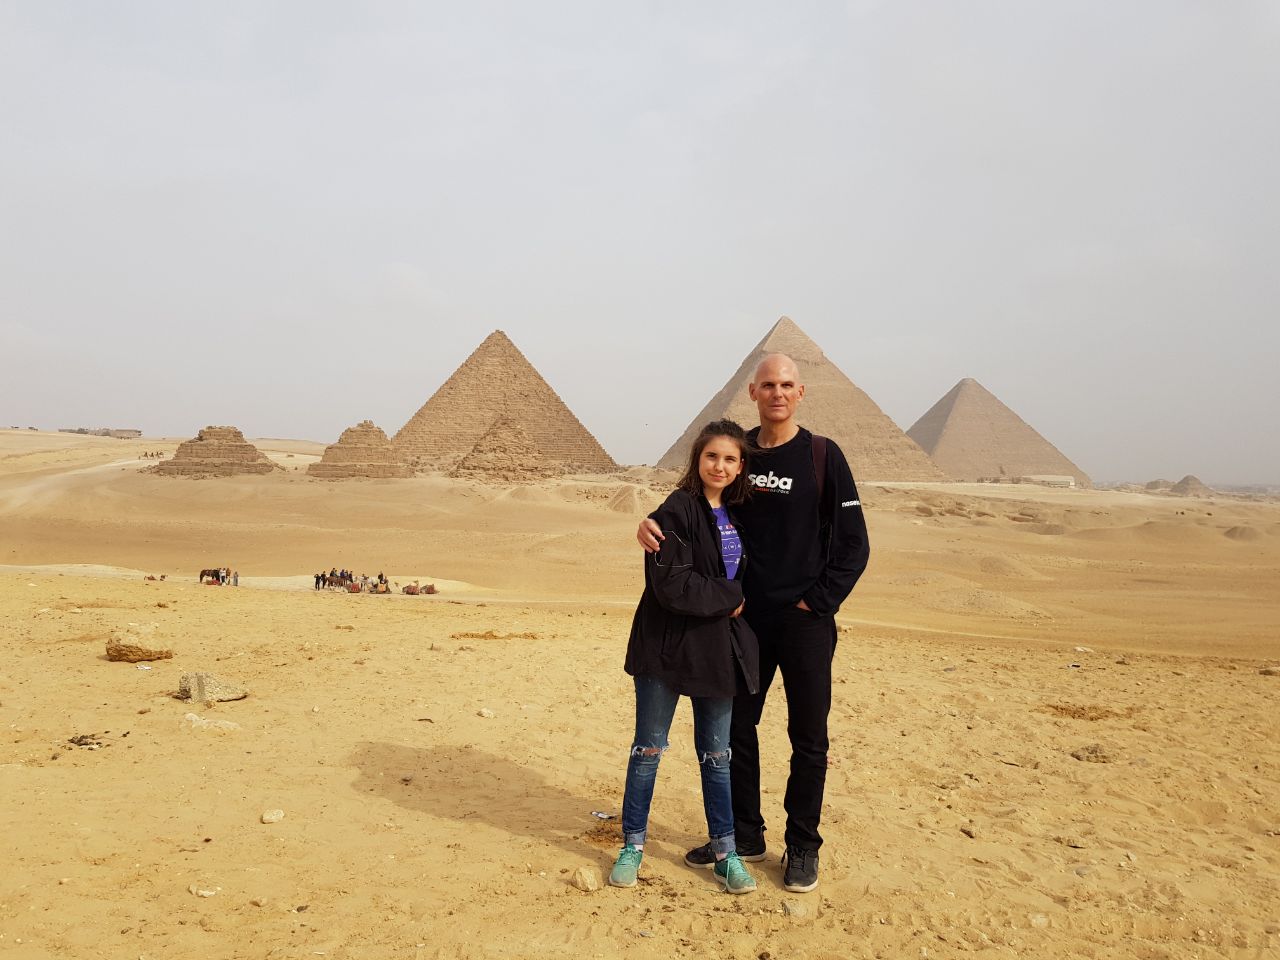 experiencing the pyramids of Giza and the streets of Cairo…